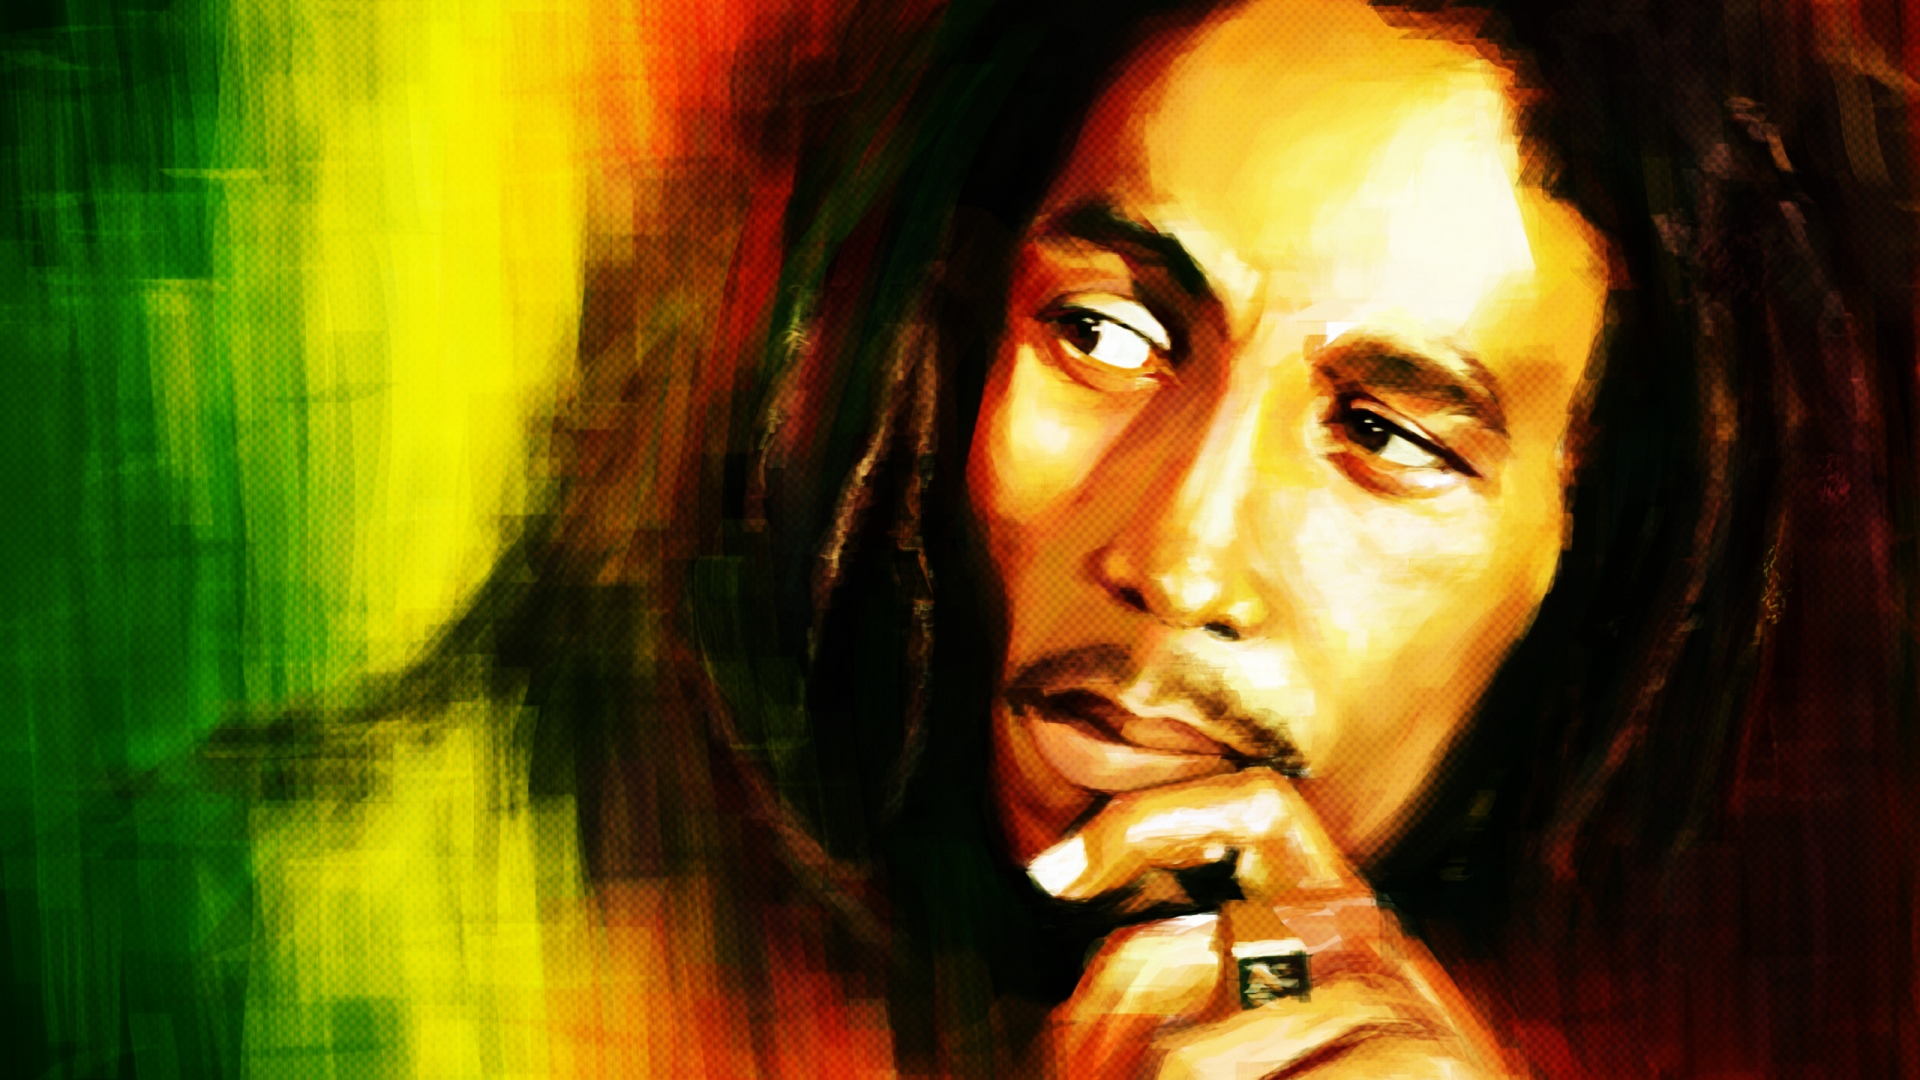 Bob Marley Portrait Painting - High Definition Wallpapers ...